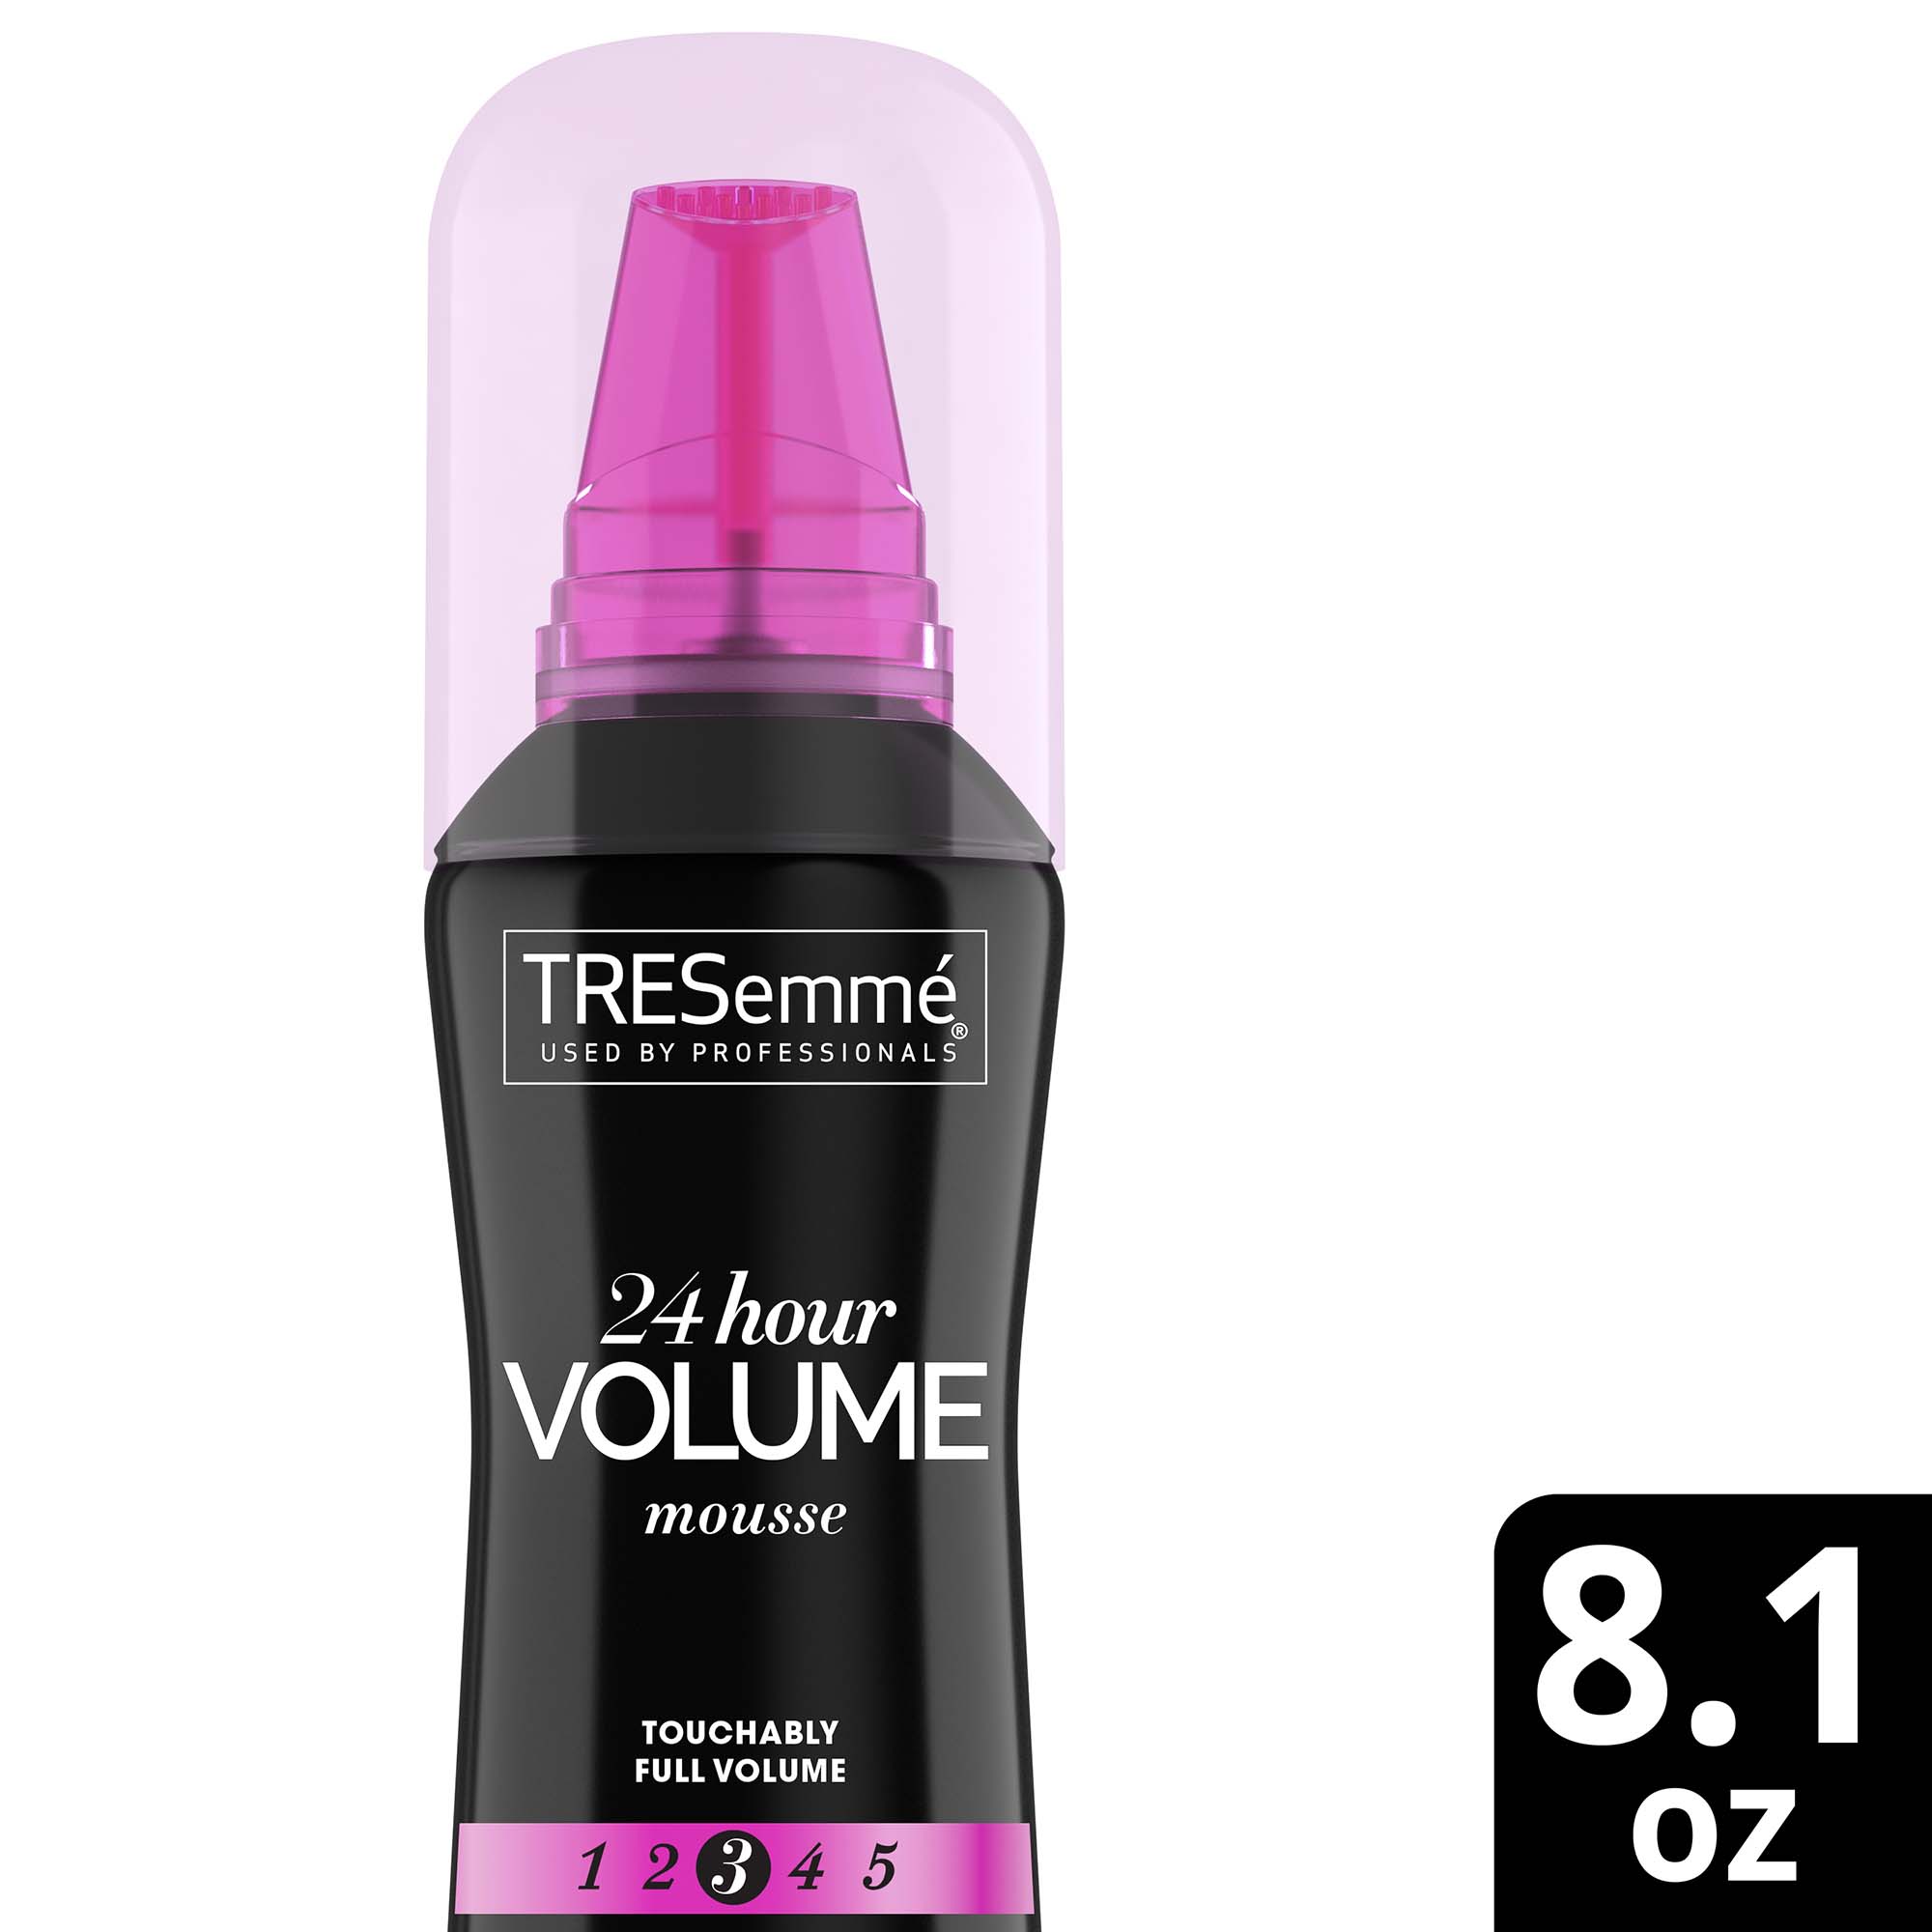 Tresemme Expert Selection Amplifying Mousse 24 Hour Body 8.1 oz - image 1 of 8